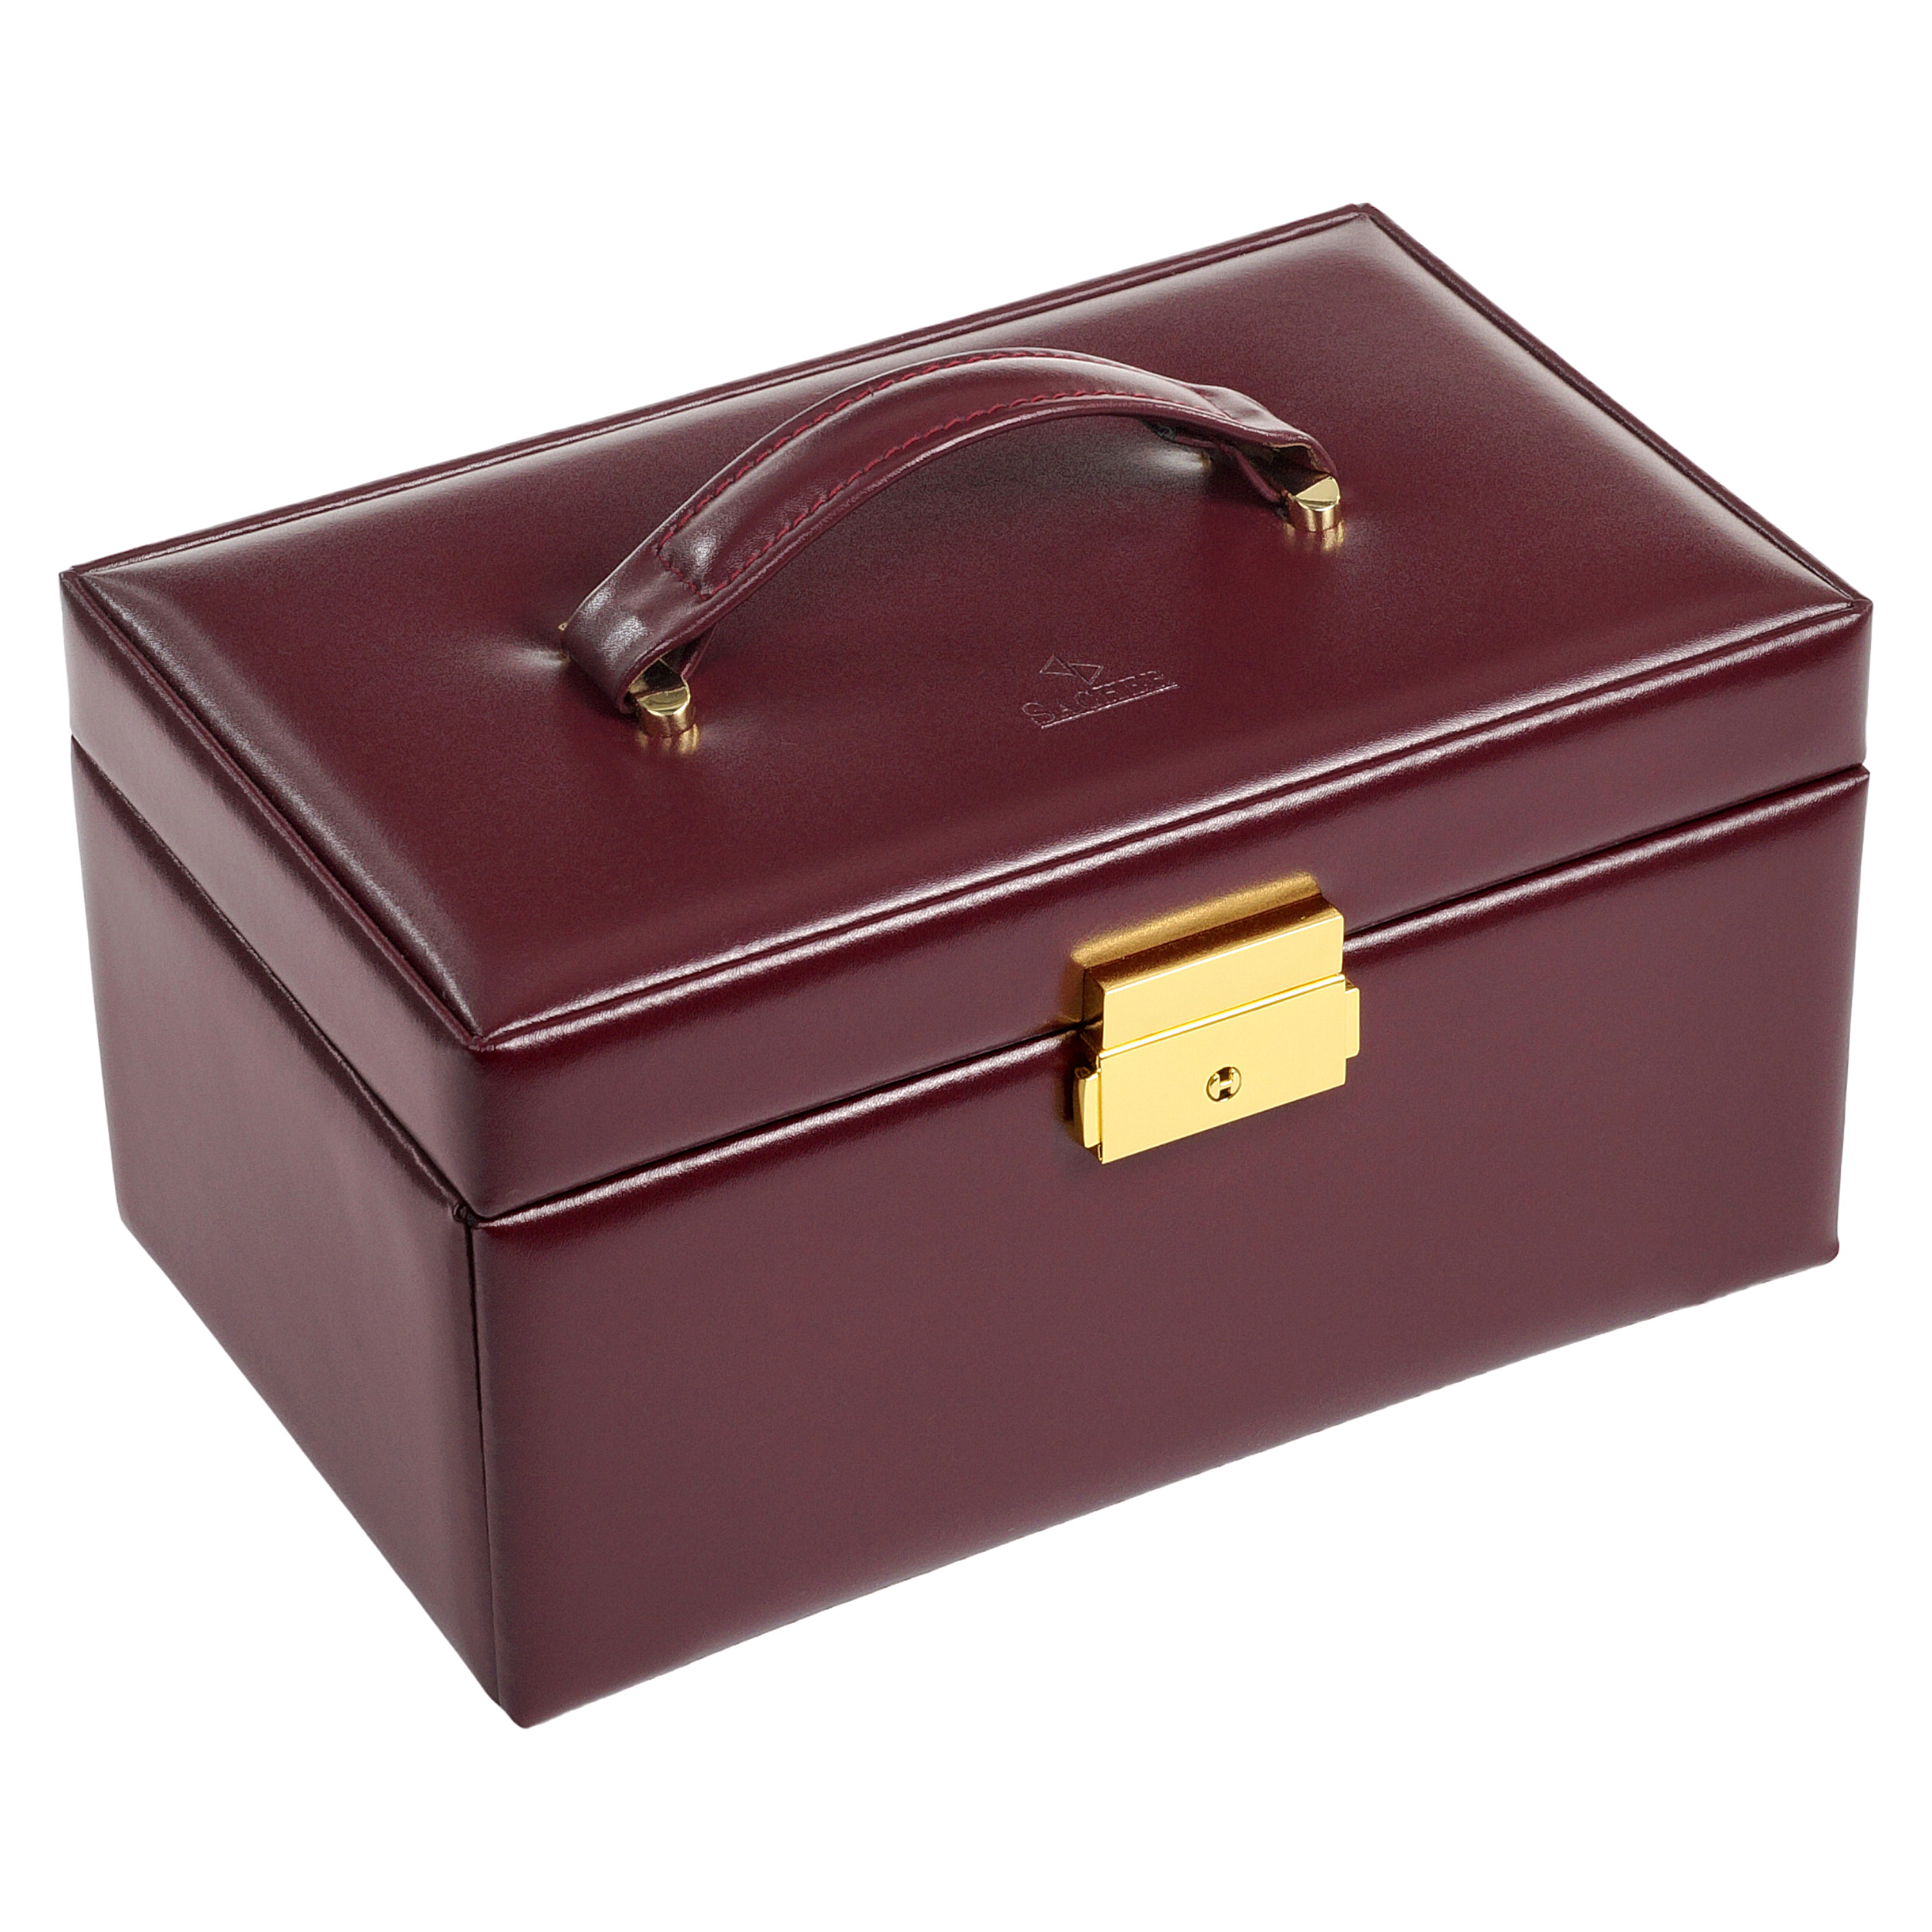 Jewellery box Elly acuro / bordeaux (leather) 